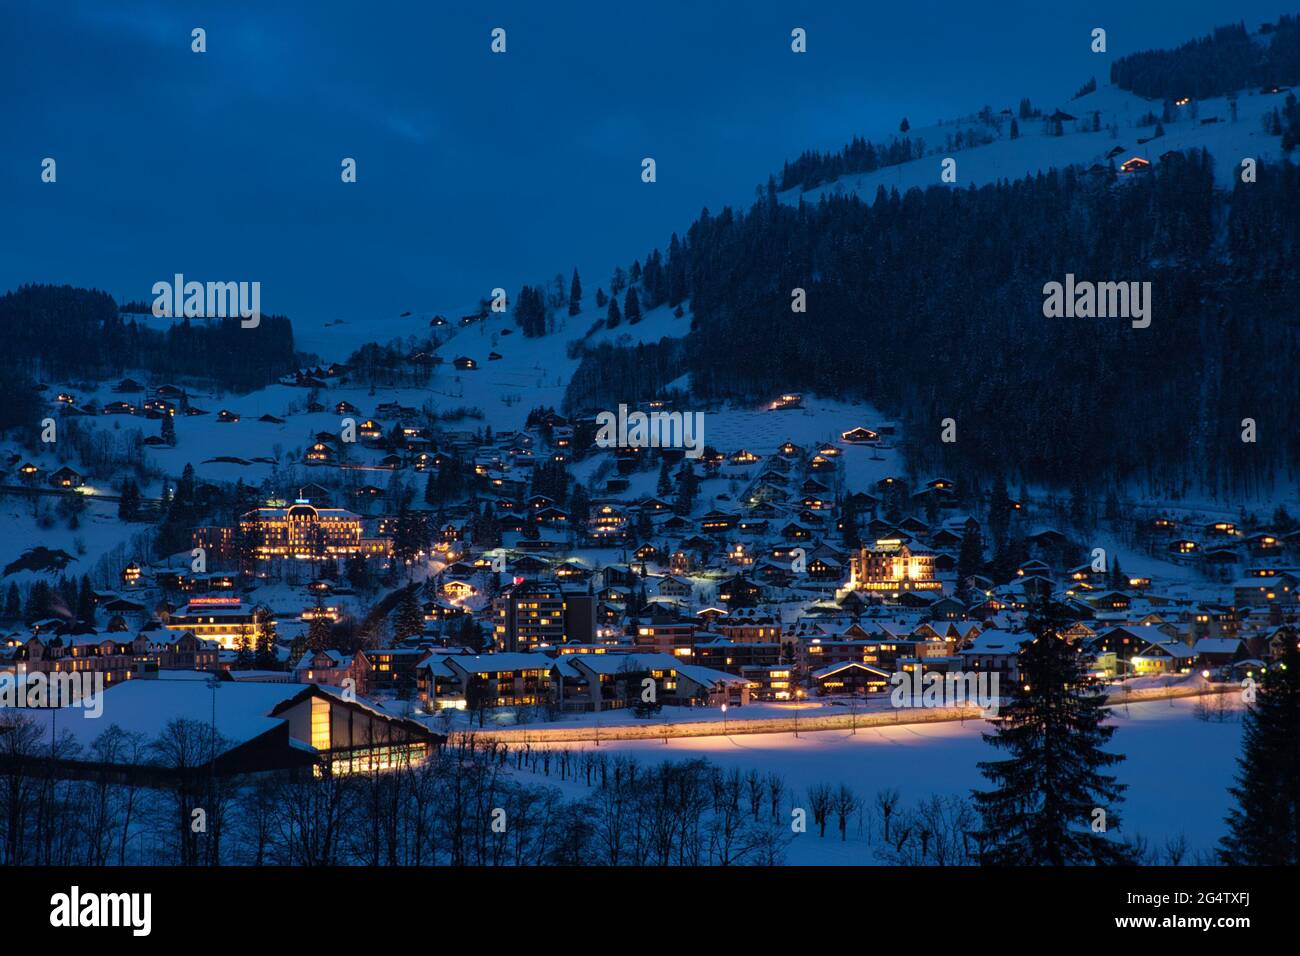 Night time winter landscape view of the snow covered town of Engelberg in Obwalden Canton, central Switzerland, lit up by street lights and houses Stock Photo